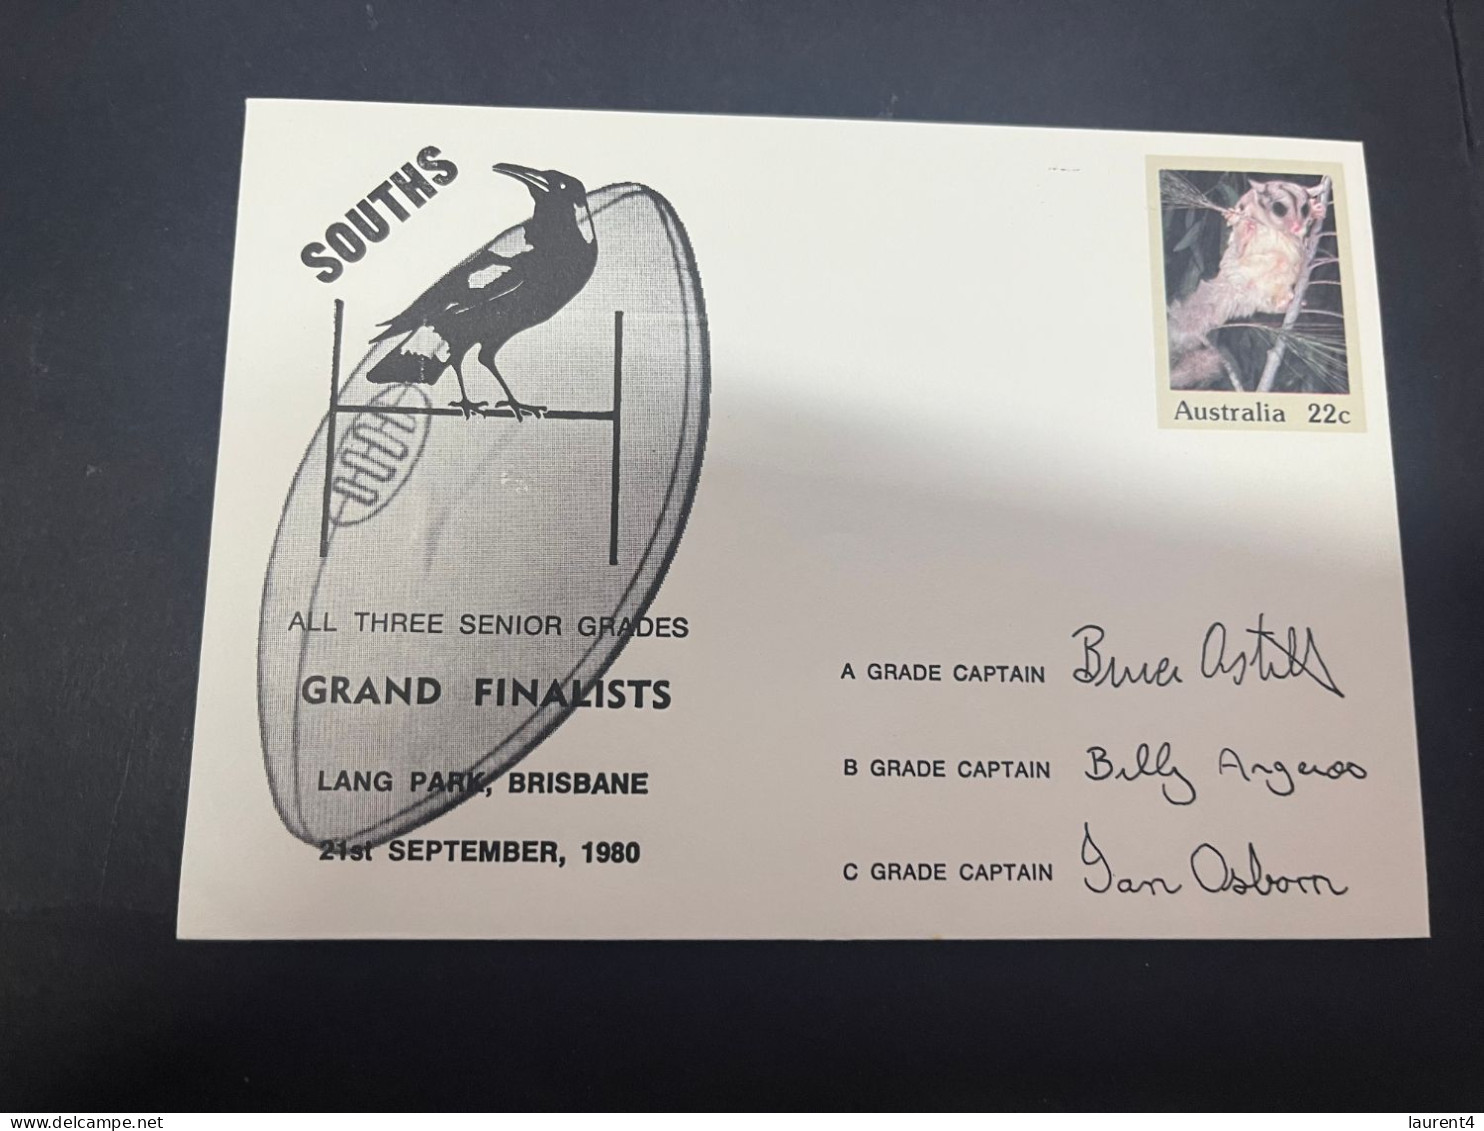 1-5-2023 (3 Z 39) Australia FDC (1 Covers) 1980 - OZ Football - South (magpies) Grand Finalists (signed - Sugar Glider) - Ersttagsbelege (FDC)